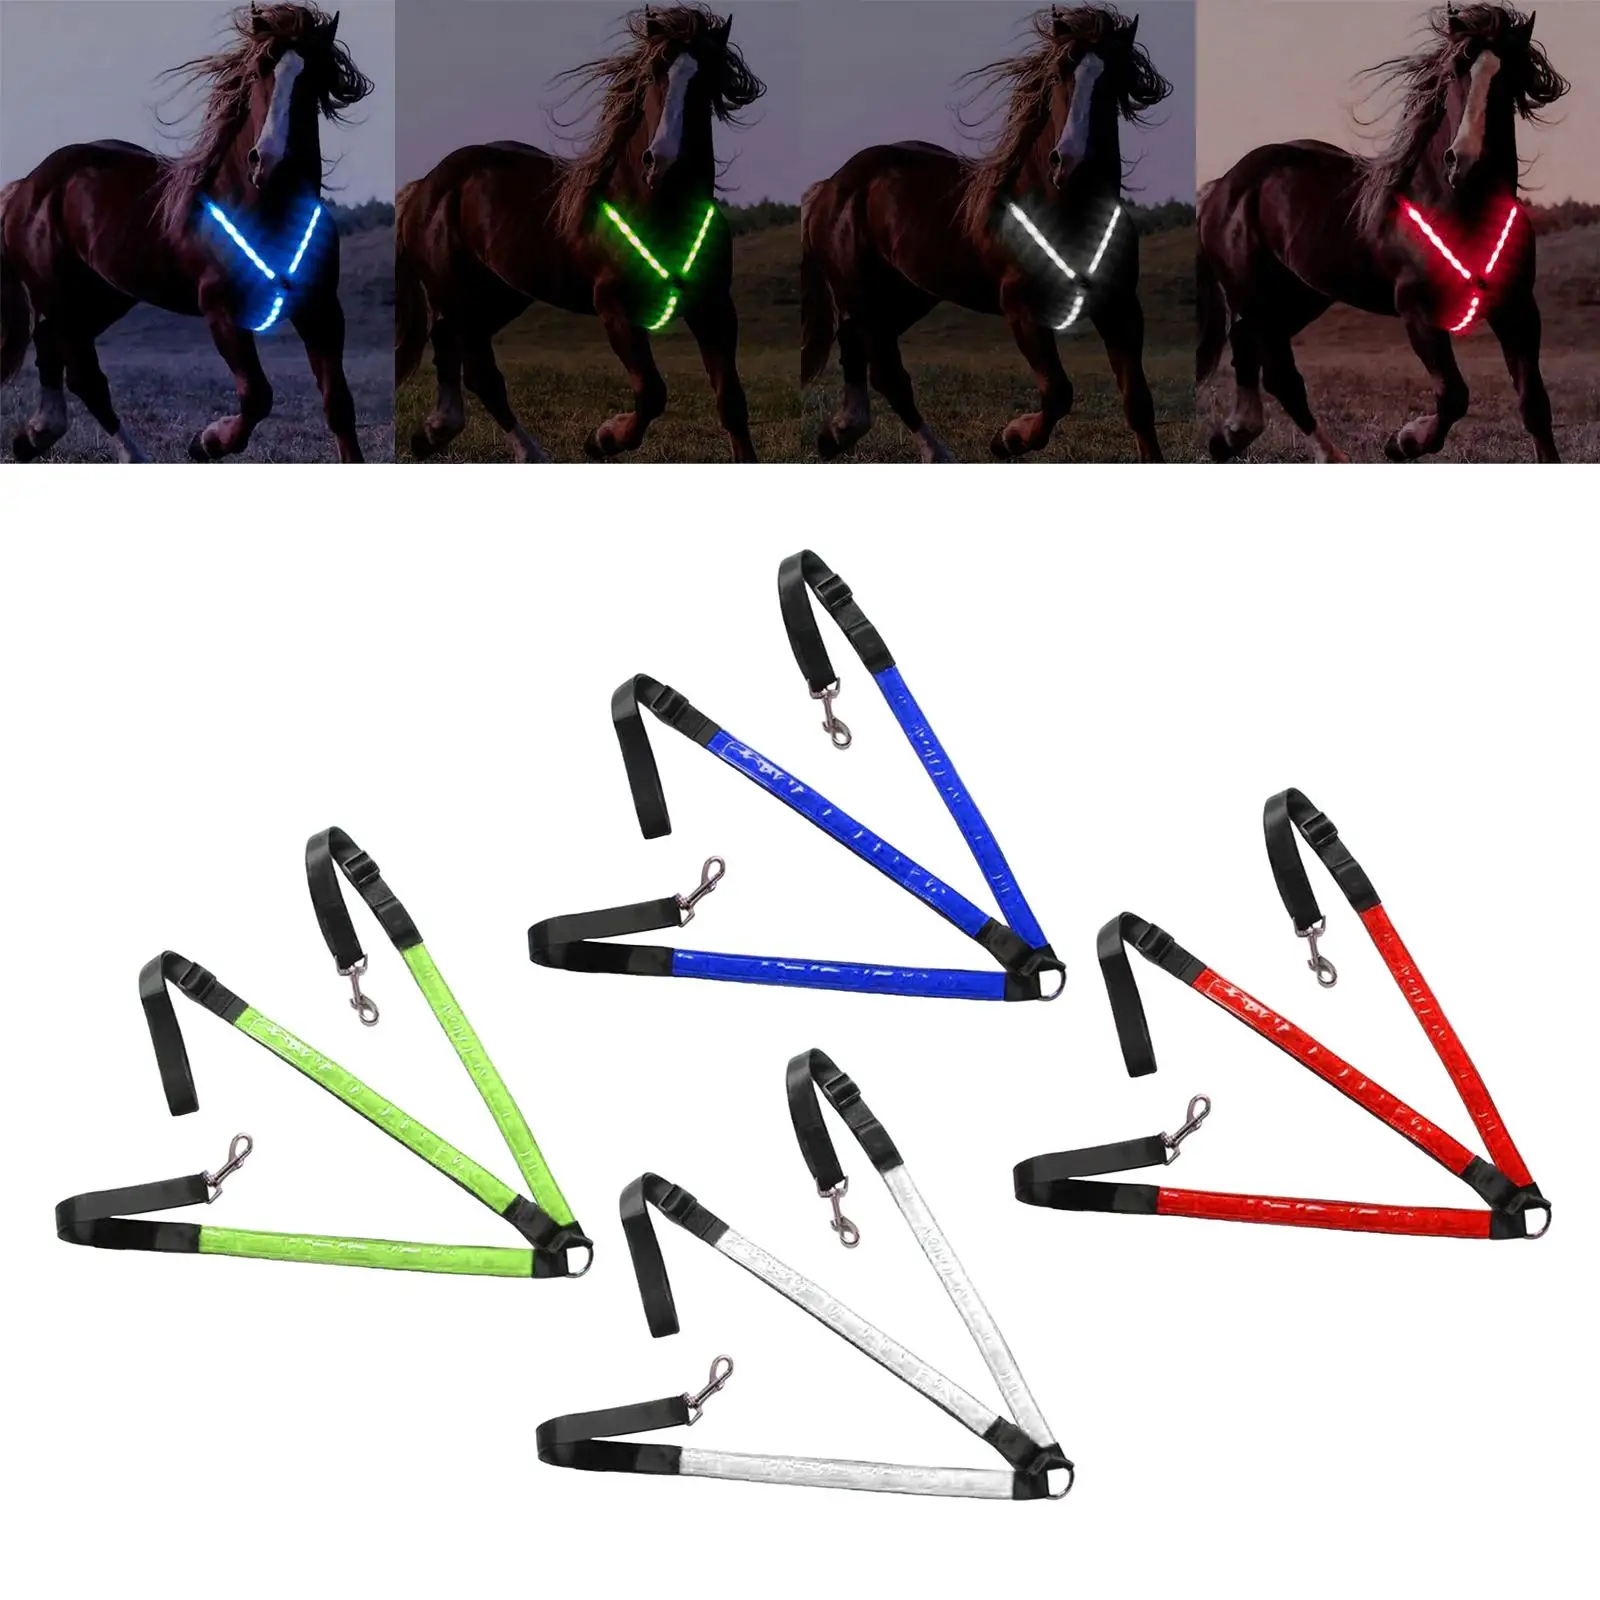 LED Horse Breastplate  Adjustable Equestrian Safety Gear  Protective Night